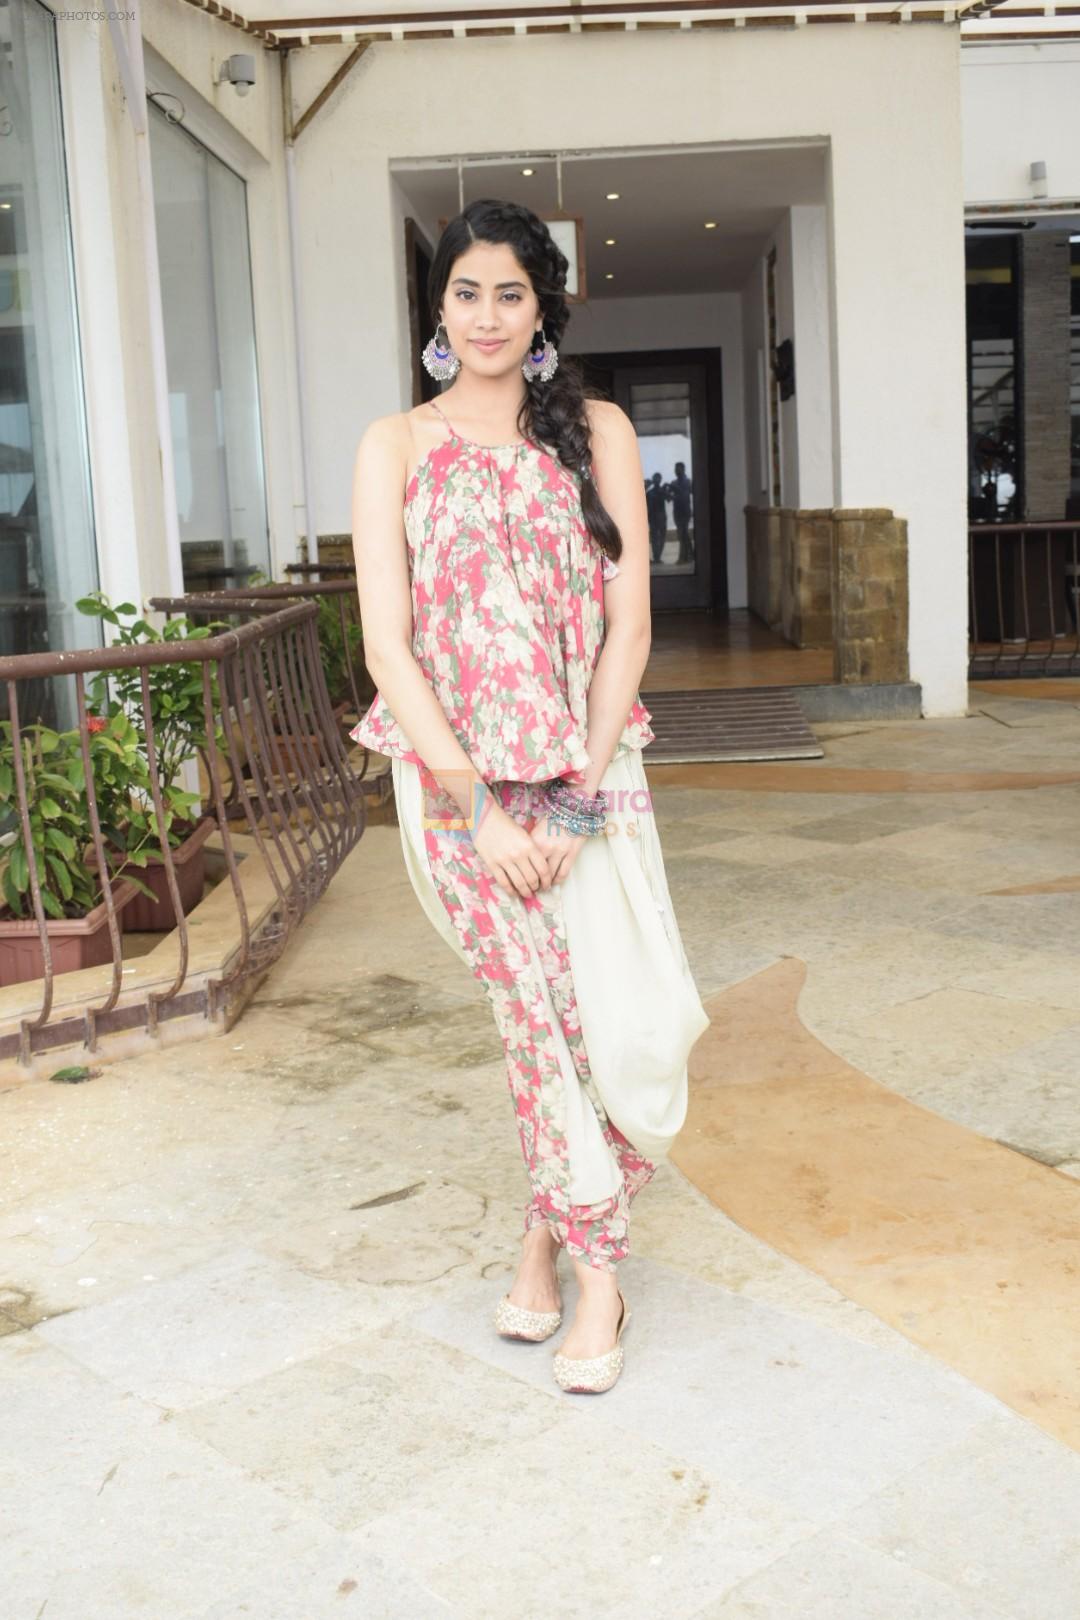 Janhvi Kapoor promote for Dhadak at media interactions in Sun n Sand,juhu on 12th July 2018